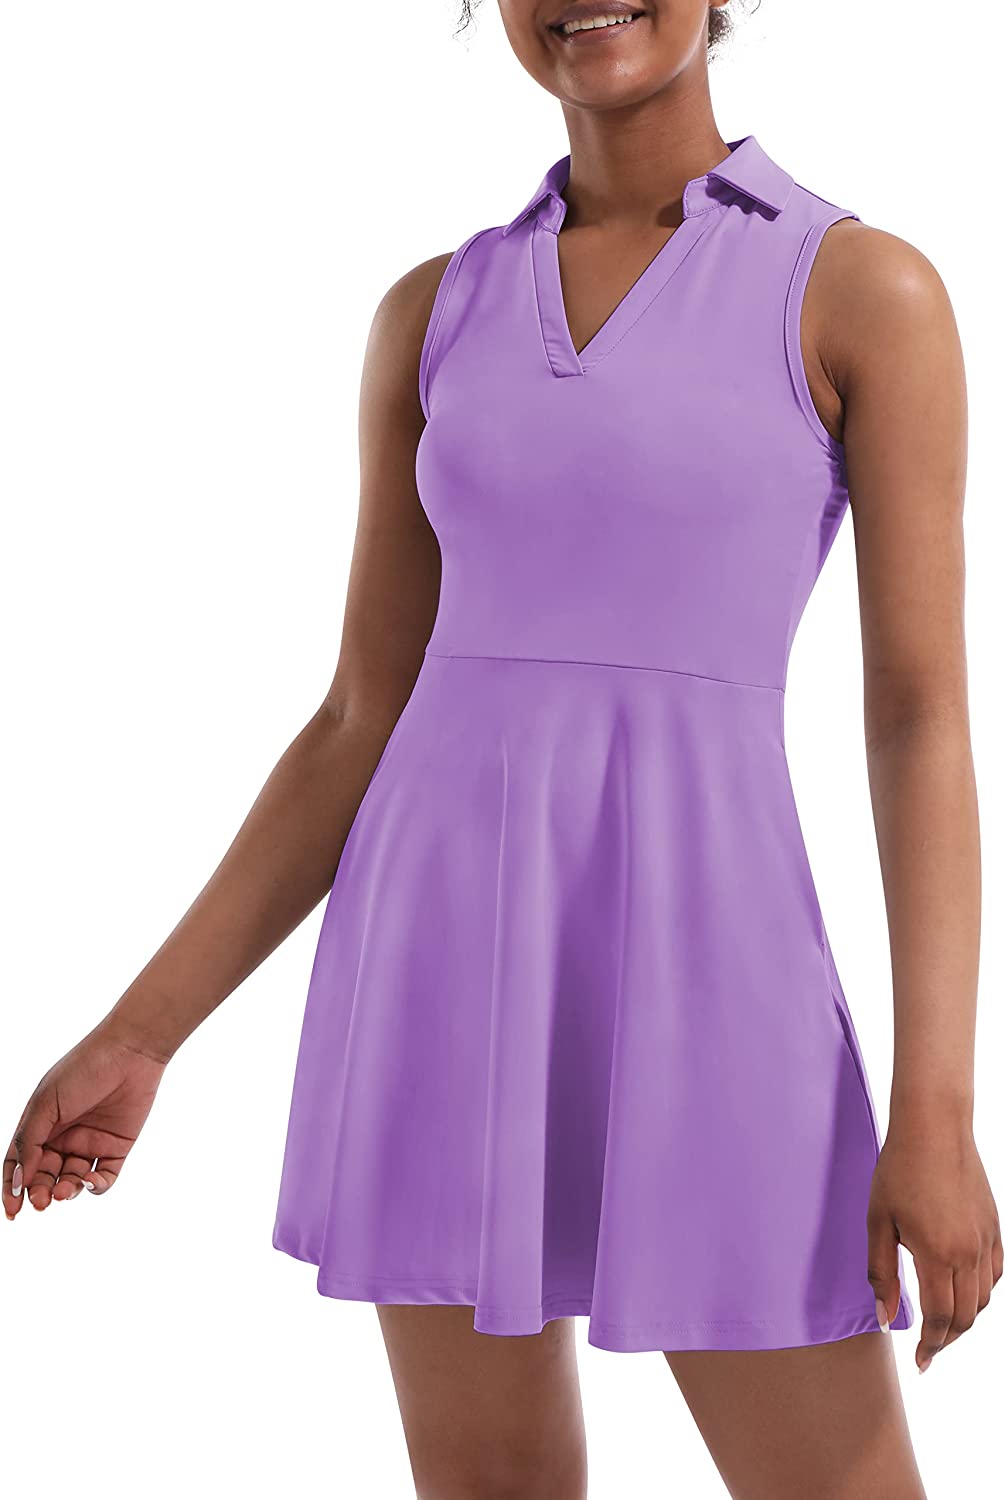 Buy Fengbay Tennis Dress for Women,Golf Dress with Built in Shorts with 4  Pockets for Sleeveless Athletic Workout Dress at